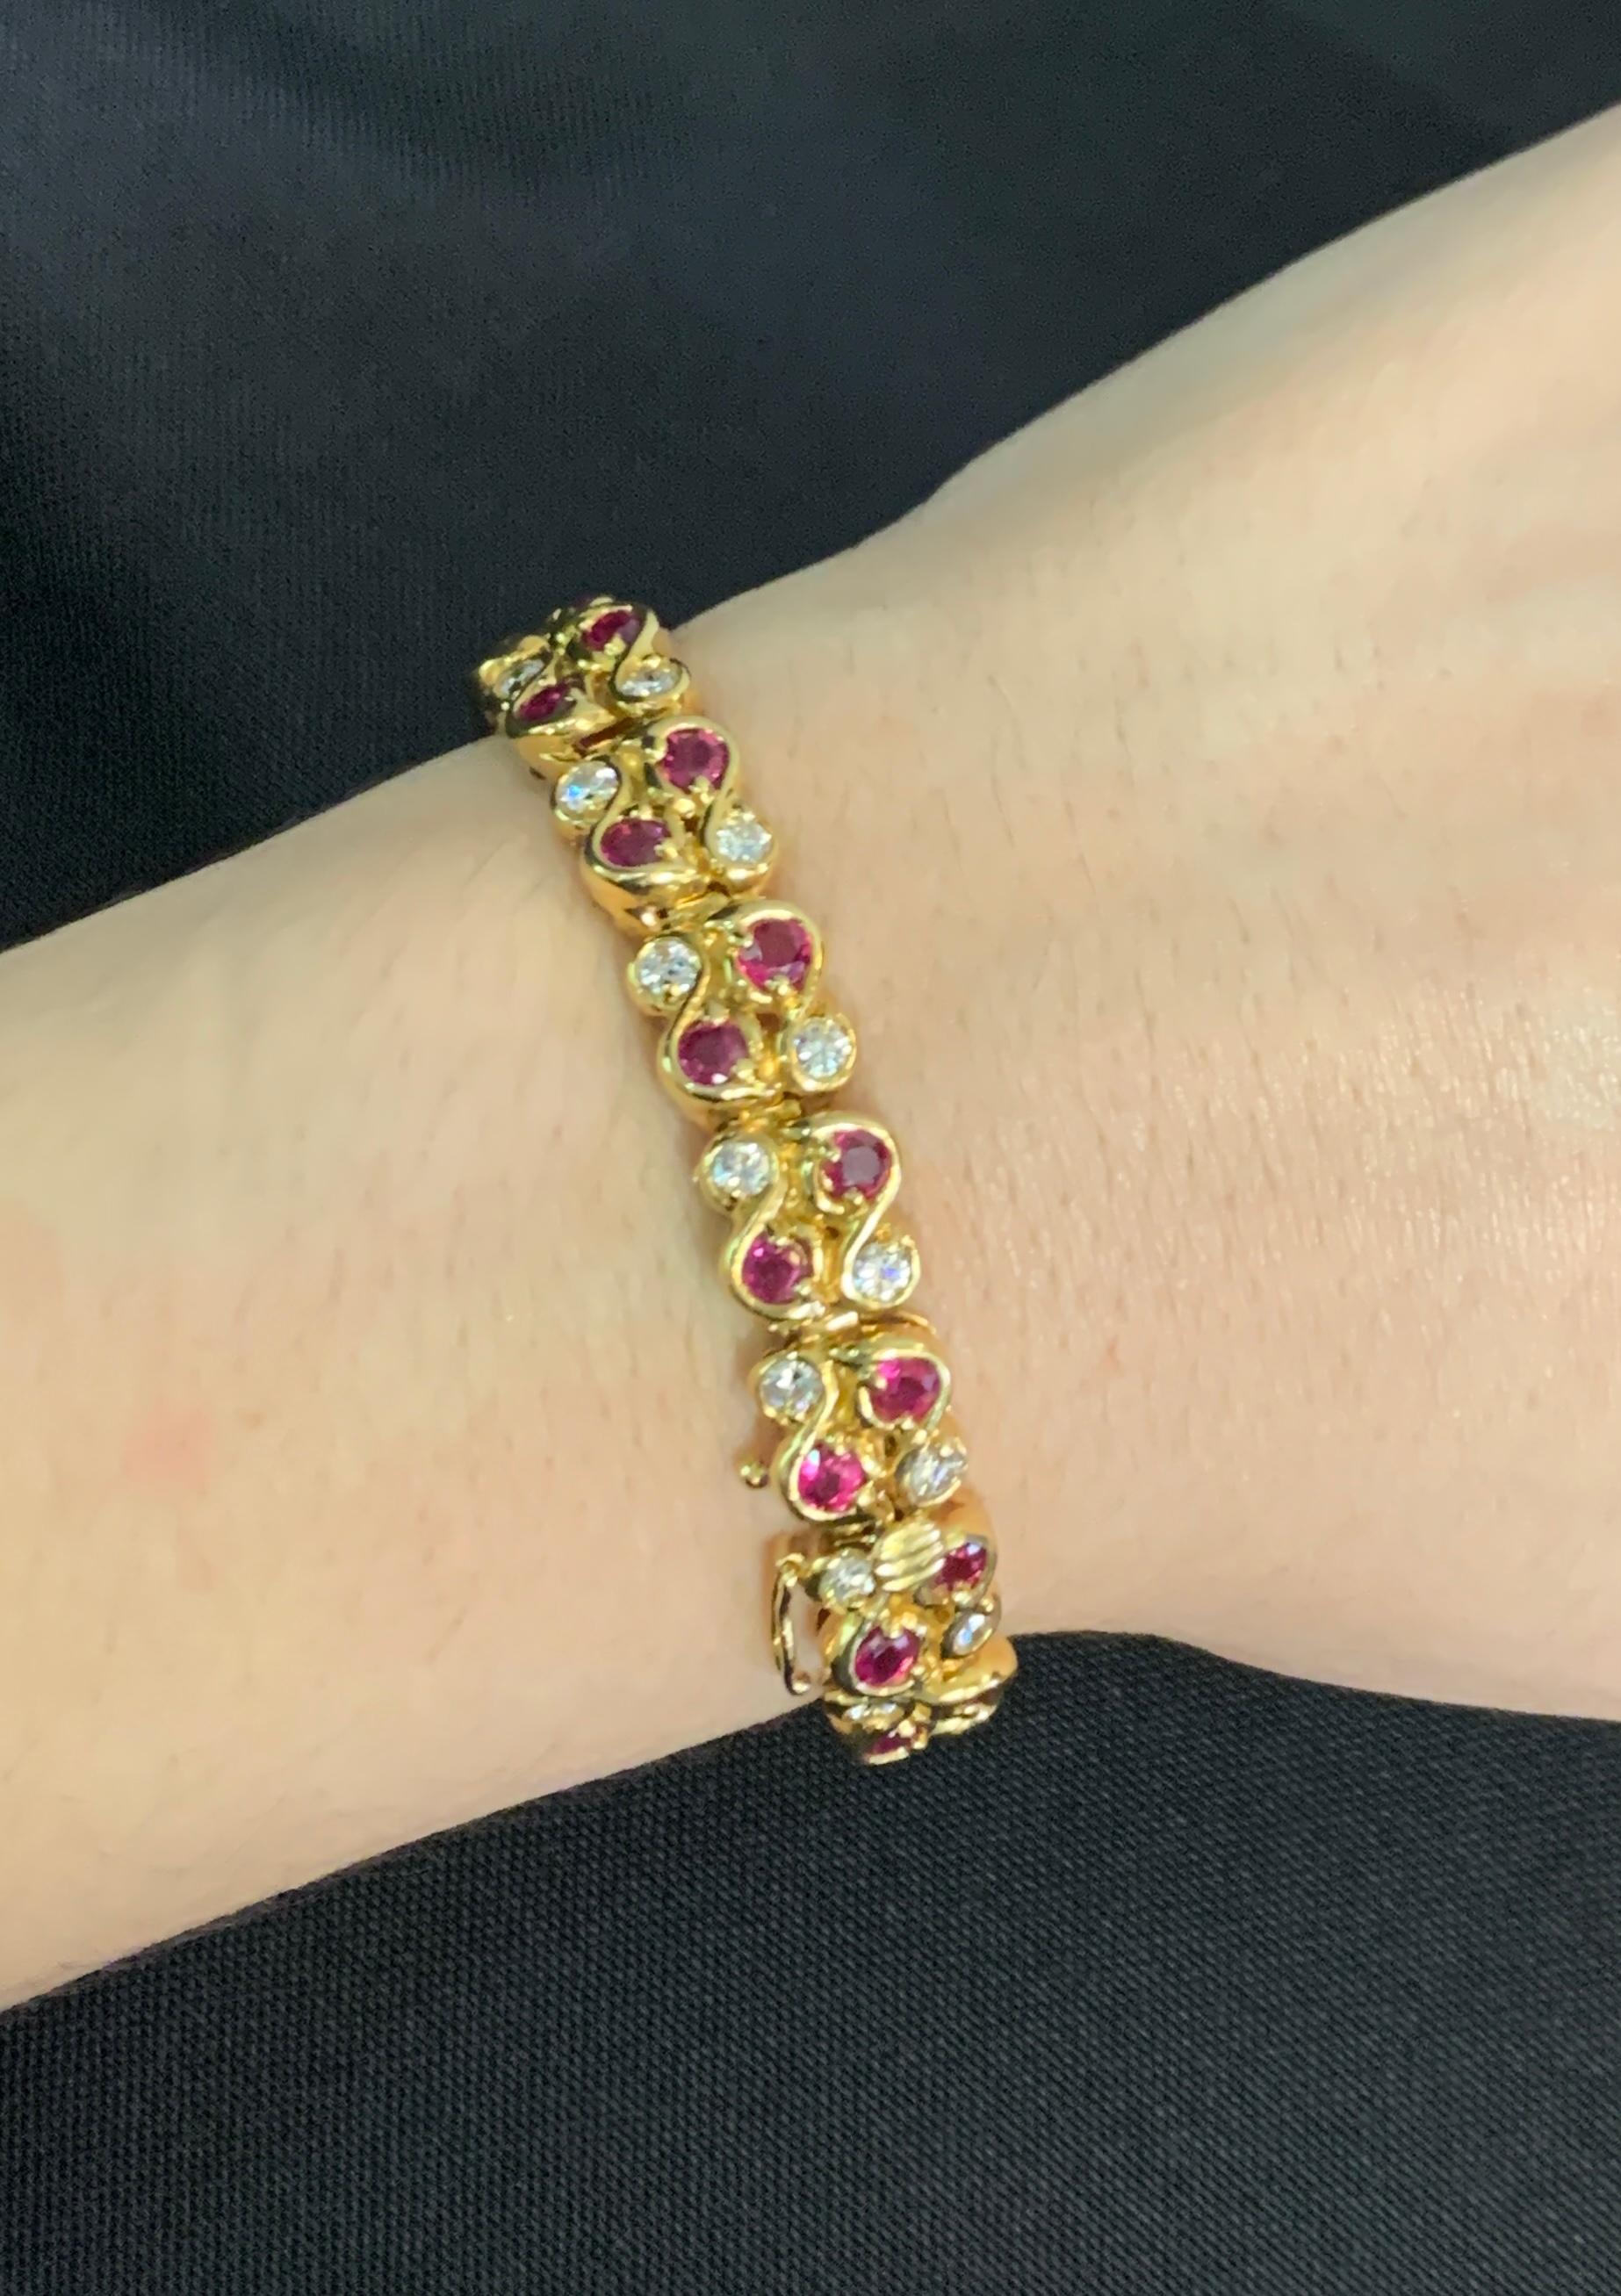 Ruby and Diamond Bracelet

Yellow gold bracelet with 34 round diamonds and 34 rubies. 

Approximate Diamond Weight: 2.85 carats
Approximate Ruby Weight: 5.55 carats

Metal Type: 18 Karat Gold 
Approximately Measures: 7